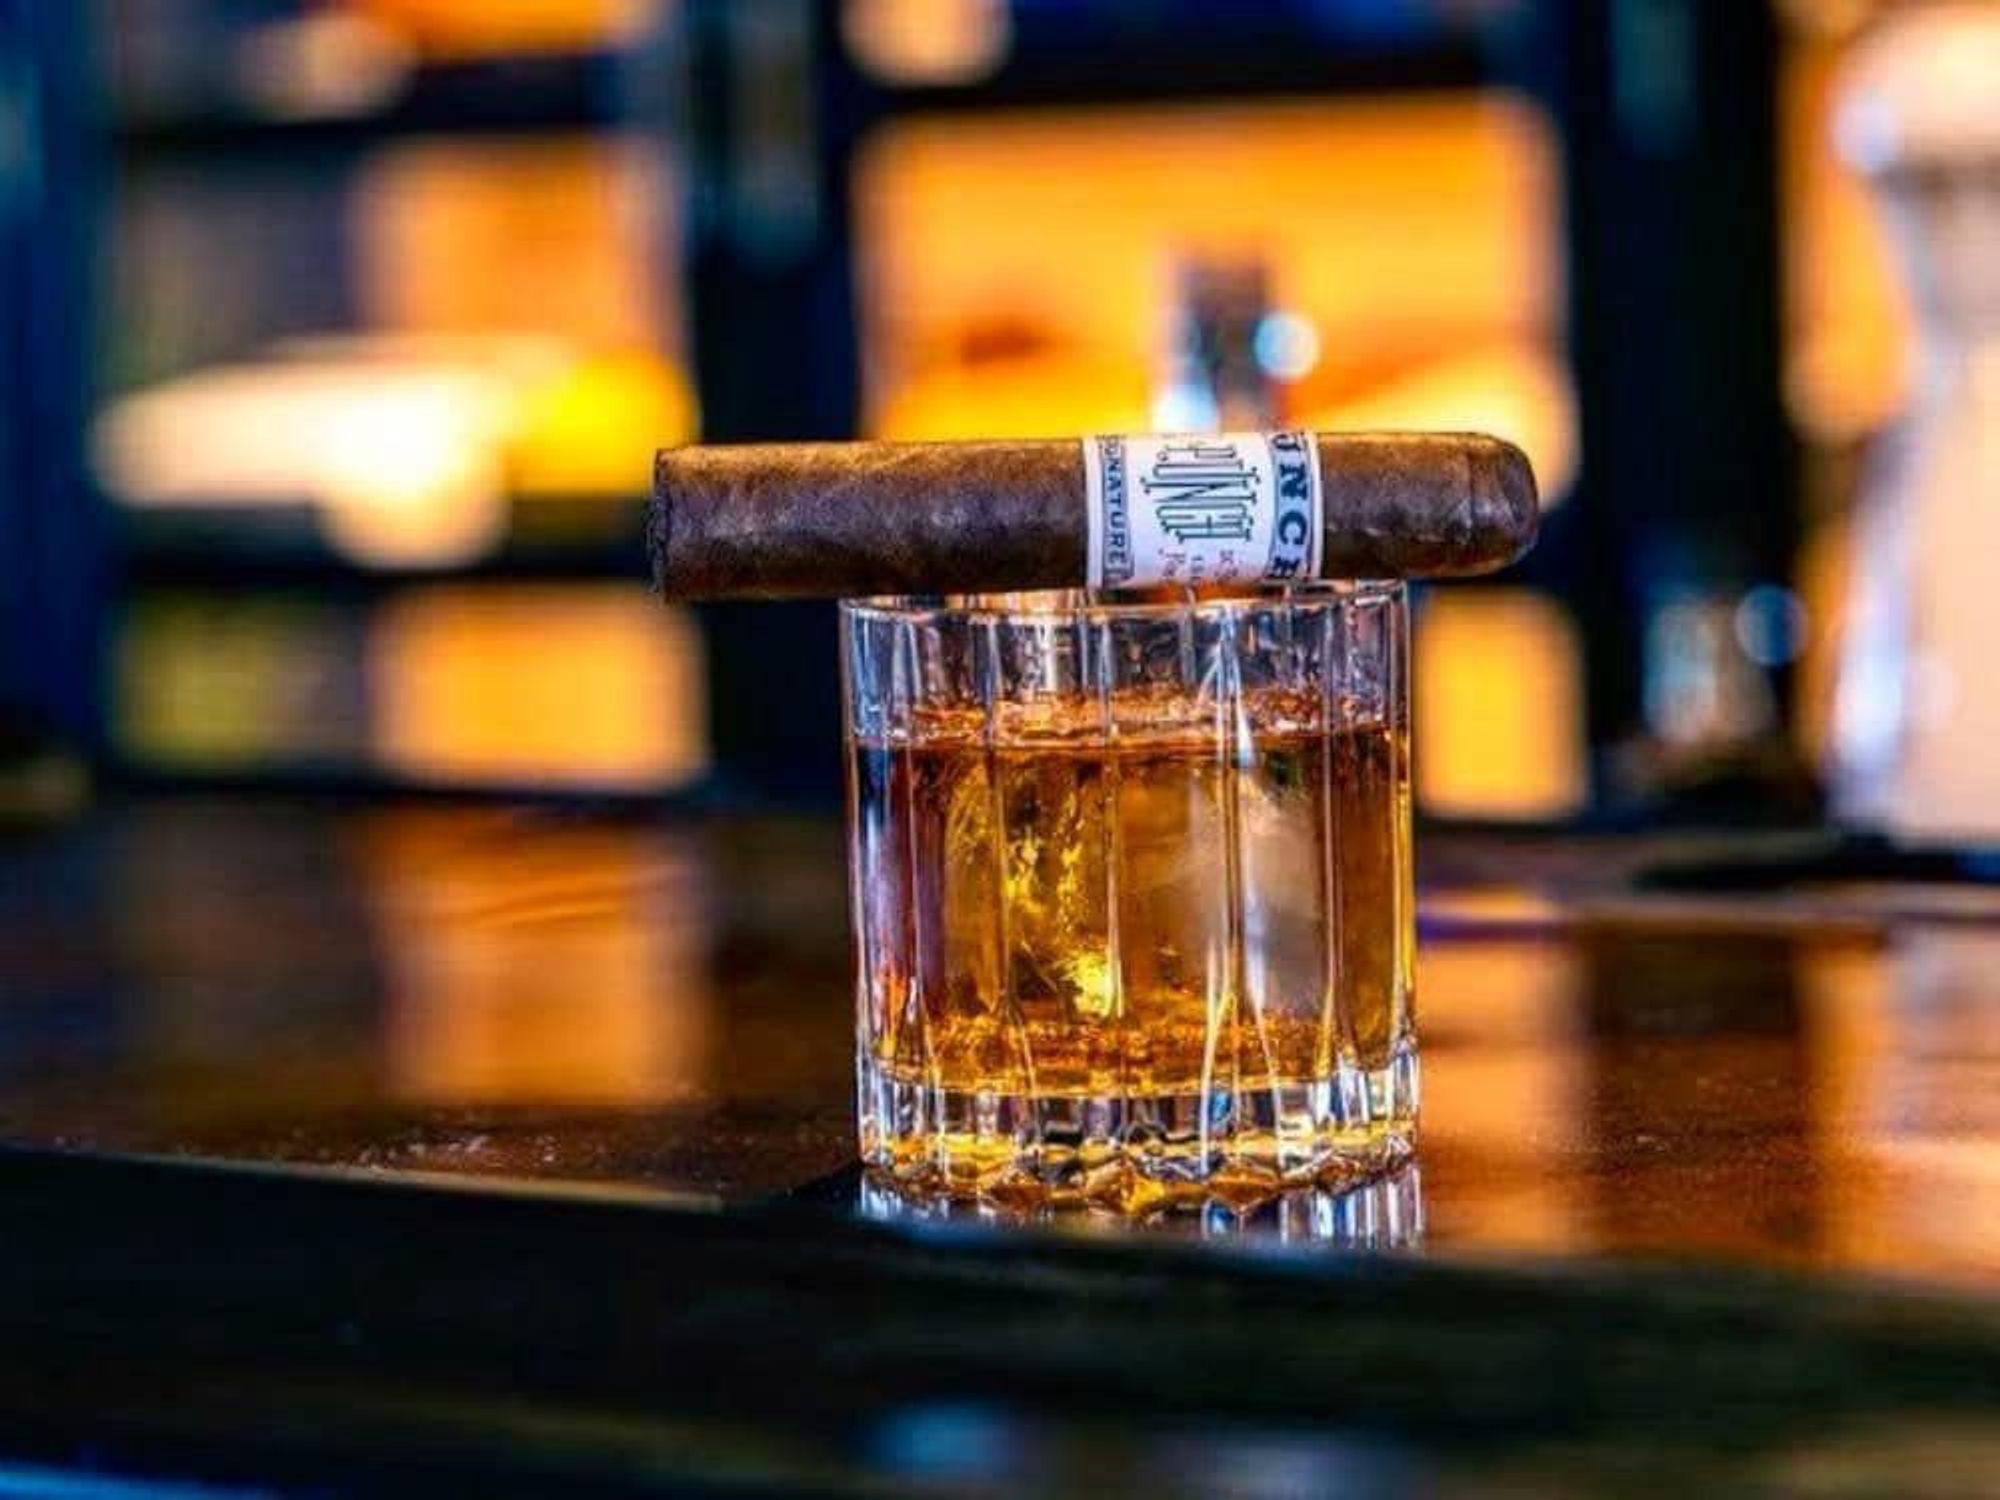 West Jax is a new spirits and cigar bar in the Near Southside.